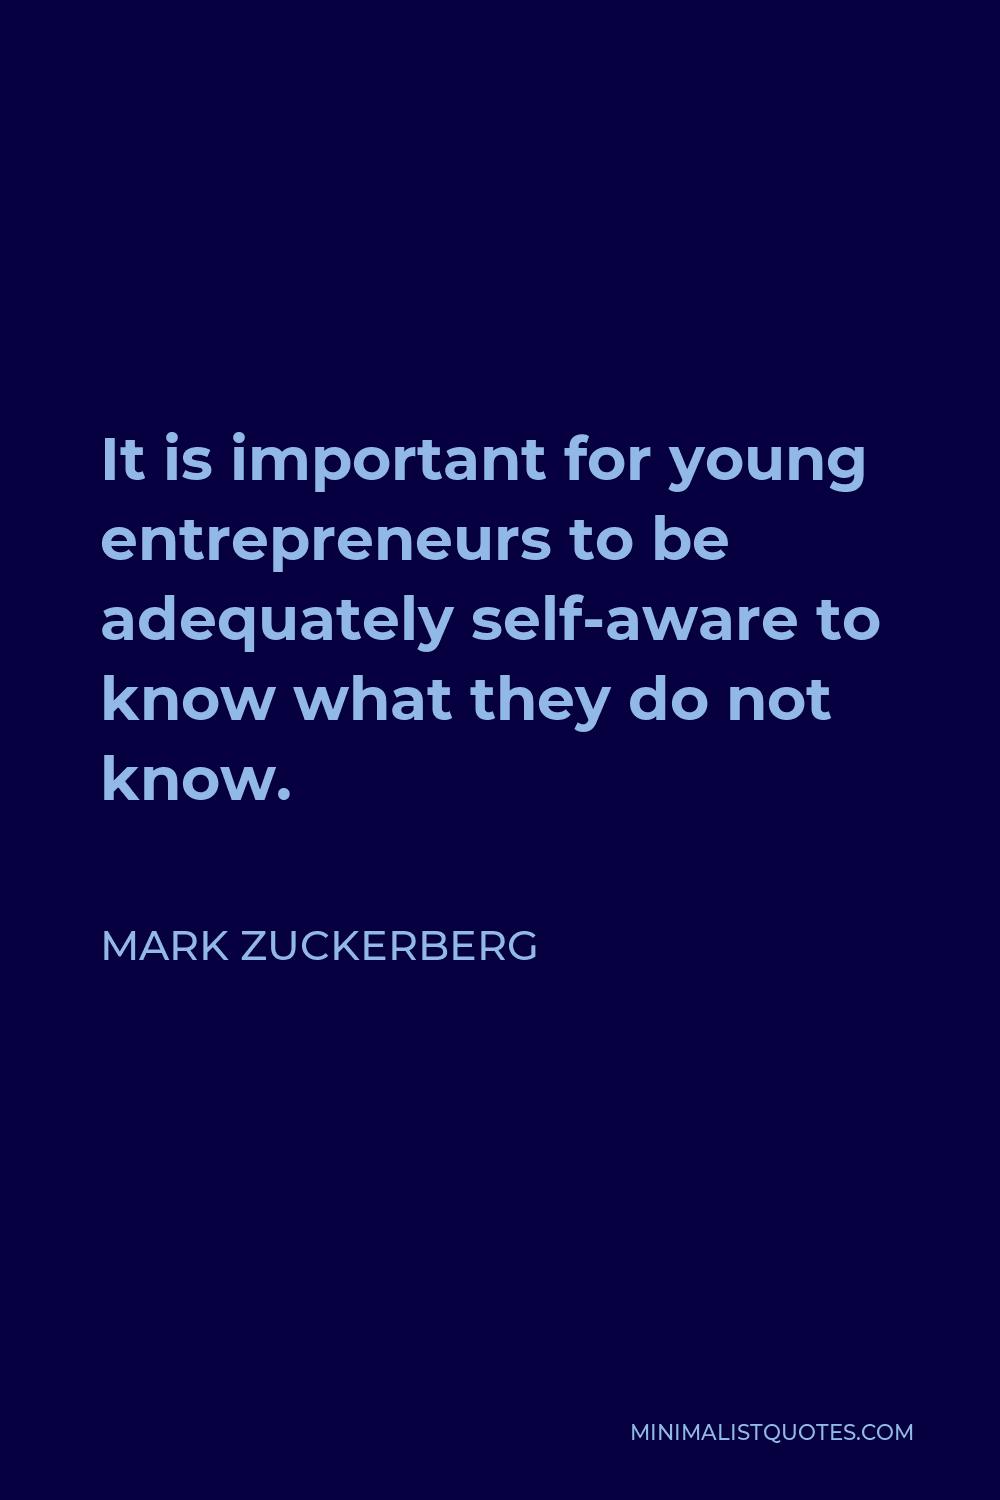 Mark Zuckerberg Quote - It is important for young entrepreneurs to be adequately self-aware to know what they do not know.